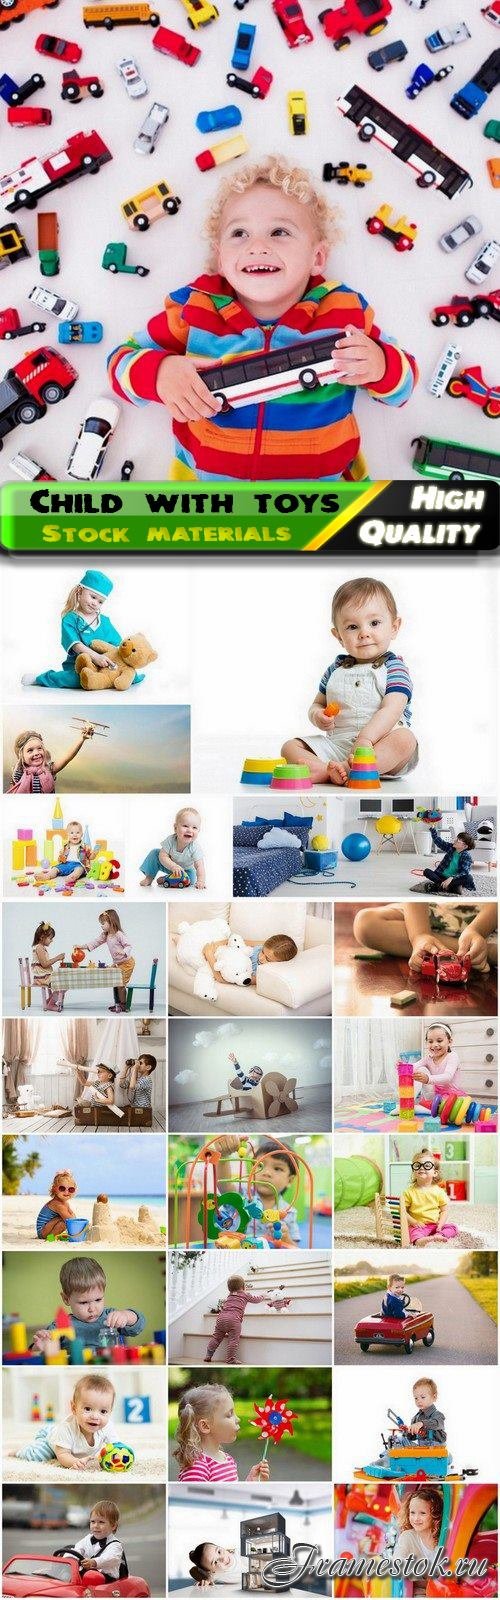 Happy child and kids play with toys - 25 HQ Jpg